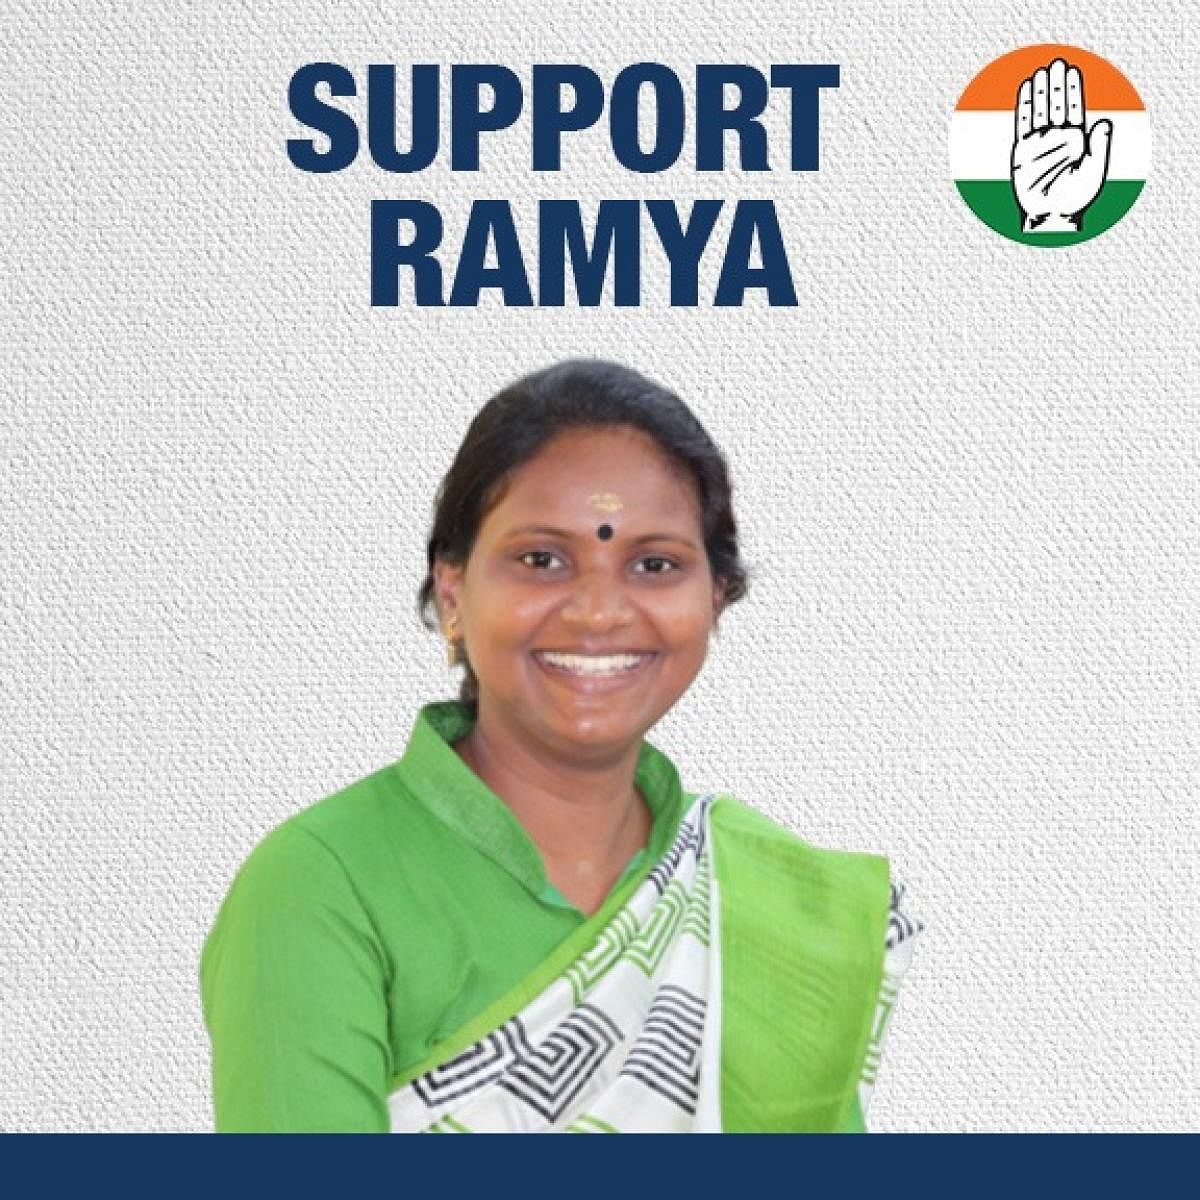 A picture of Ramya Haridas from the website set up to donate to her campaign.